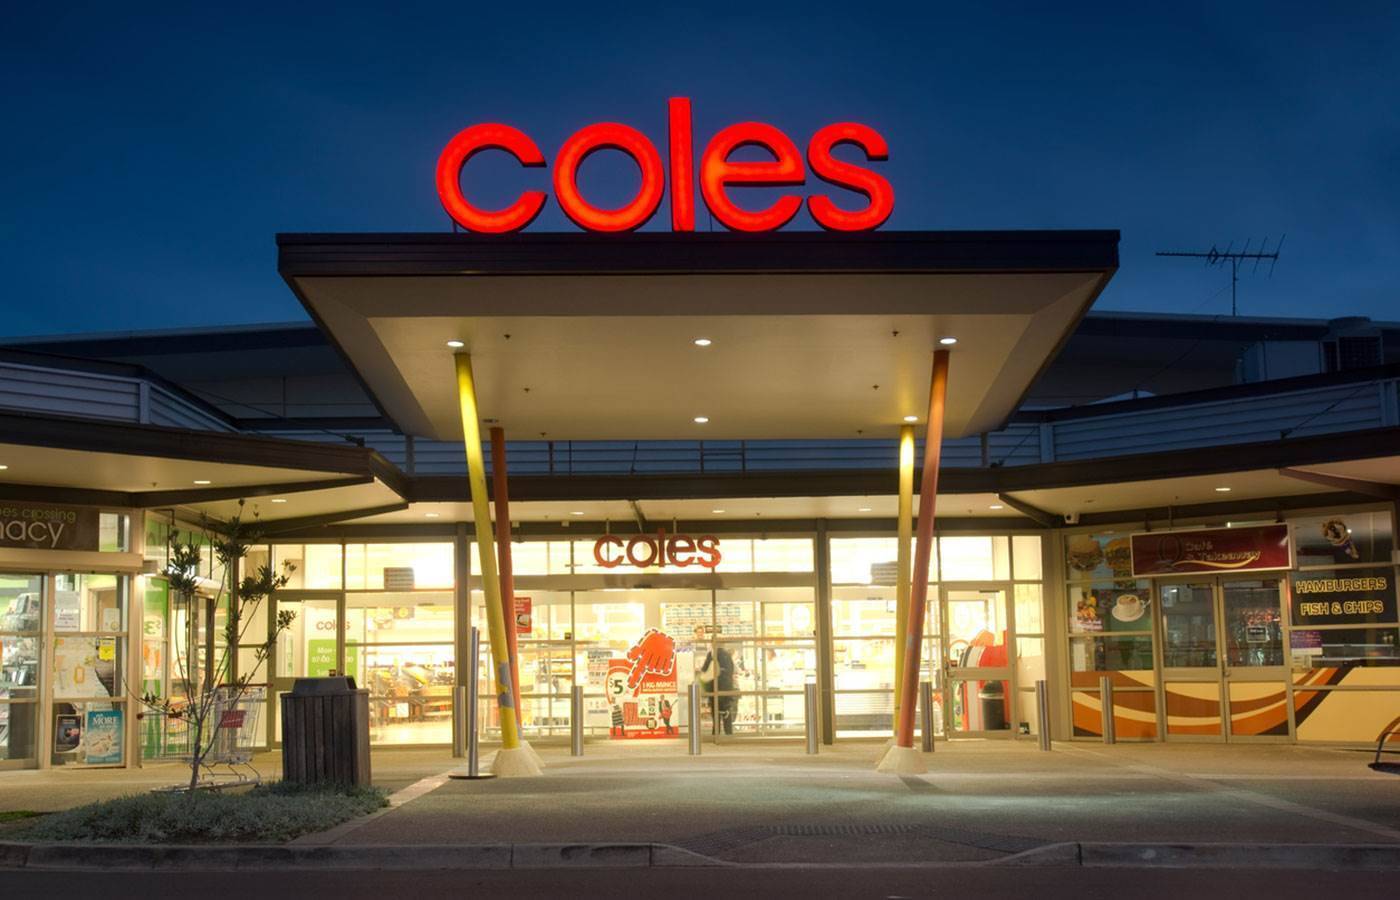 Job opportunity for store operator provided by Coles Group, see how to apply